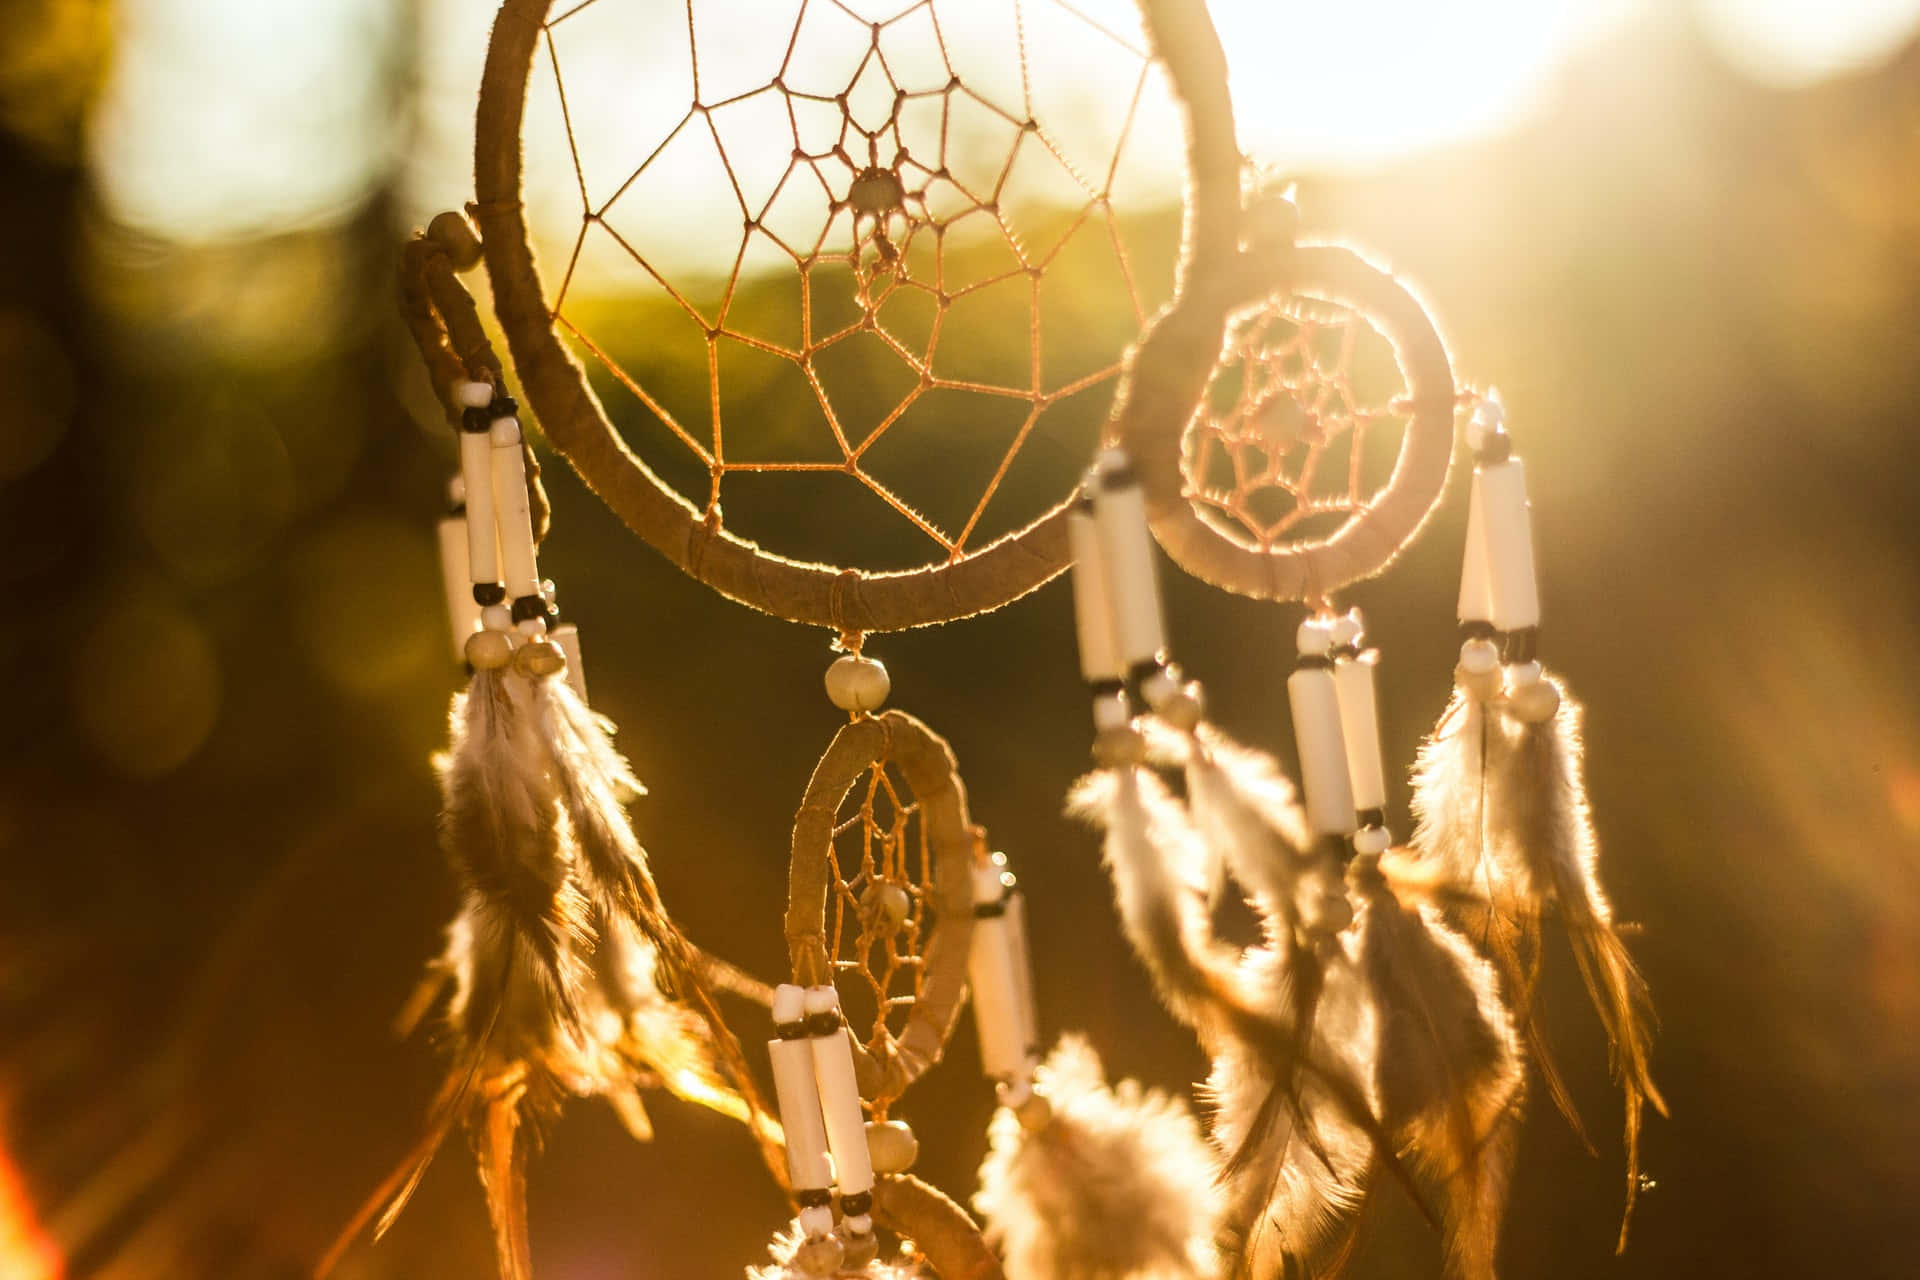 500 Dreamcatcher Pictures HD  Download Free Images on Unsplash